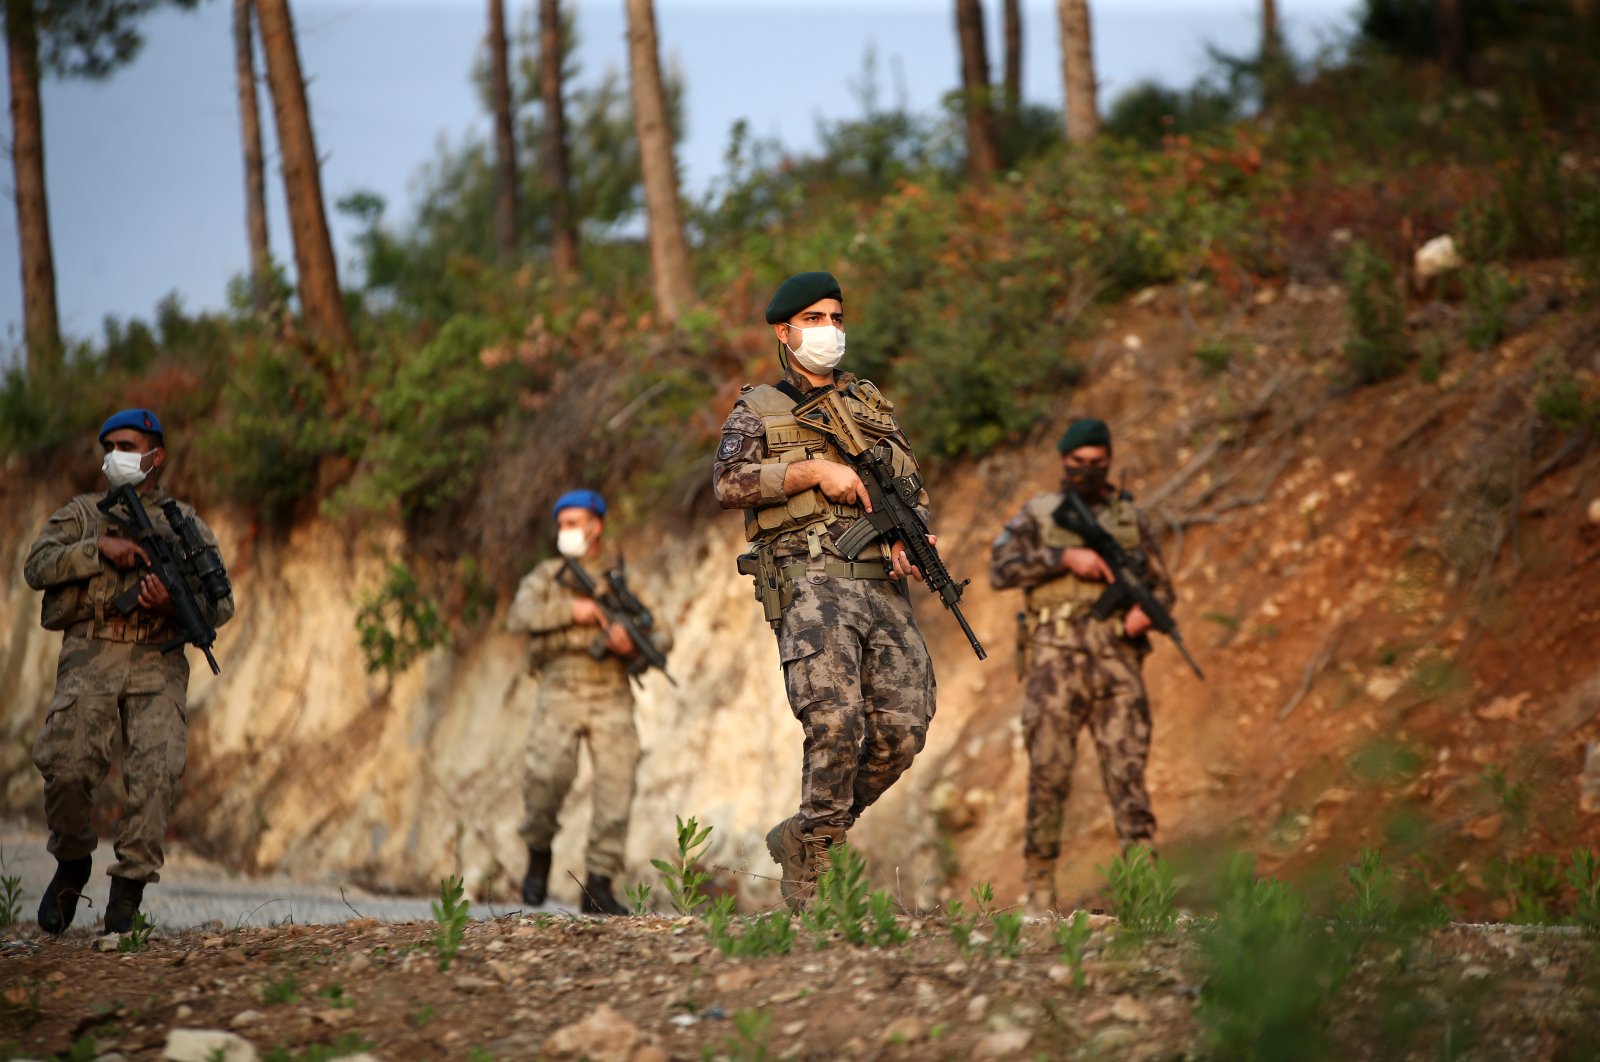 Police officers of the Special Operations Branch of the Provincial Security Directorate patrol the area on the dominant hills called "Bayraktepe" and "Sancaktepe" in the Amanos Mountains, Turkey, April 29, 2021. (AA Photo)